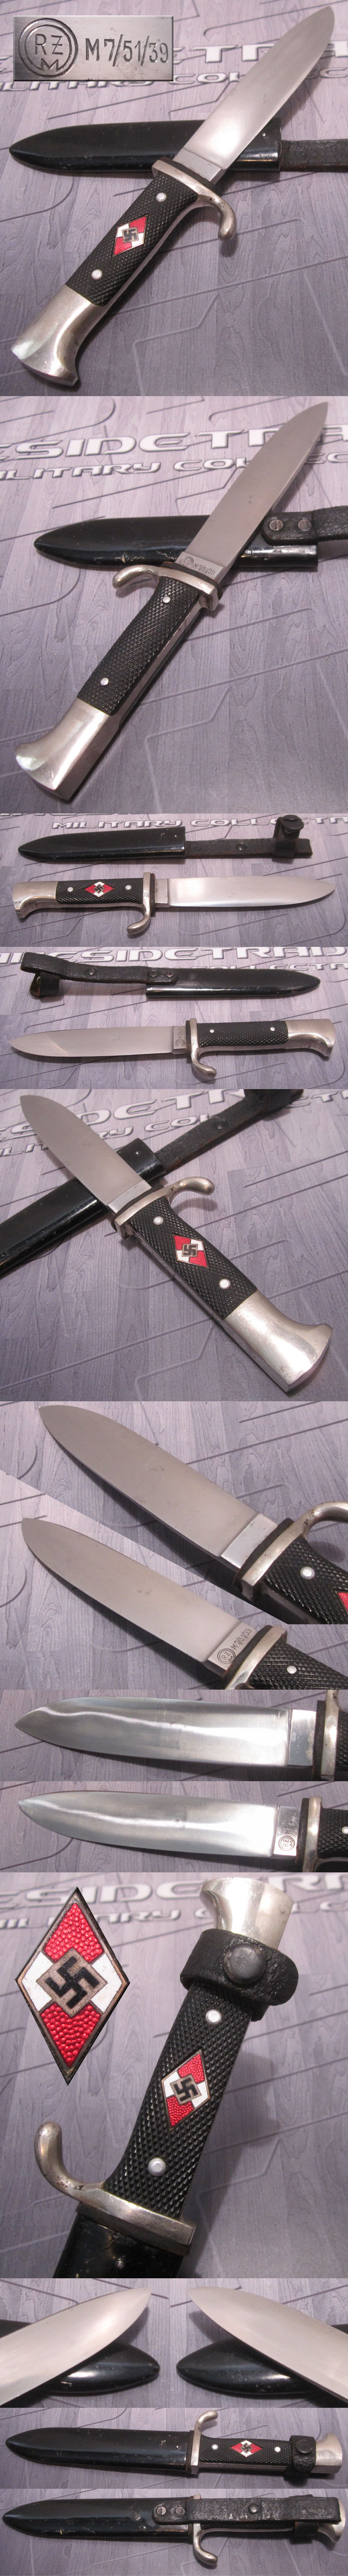 RZM M7/51/39 Hitler Youth Knife